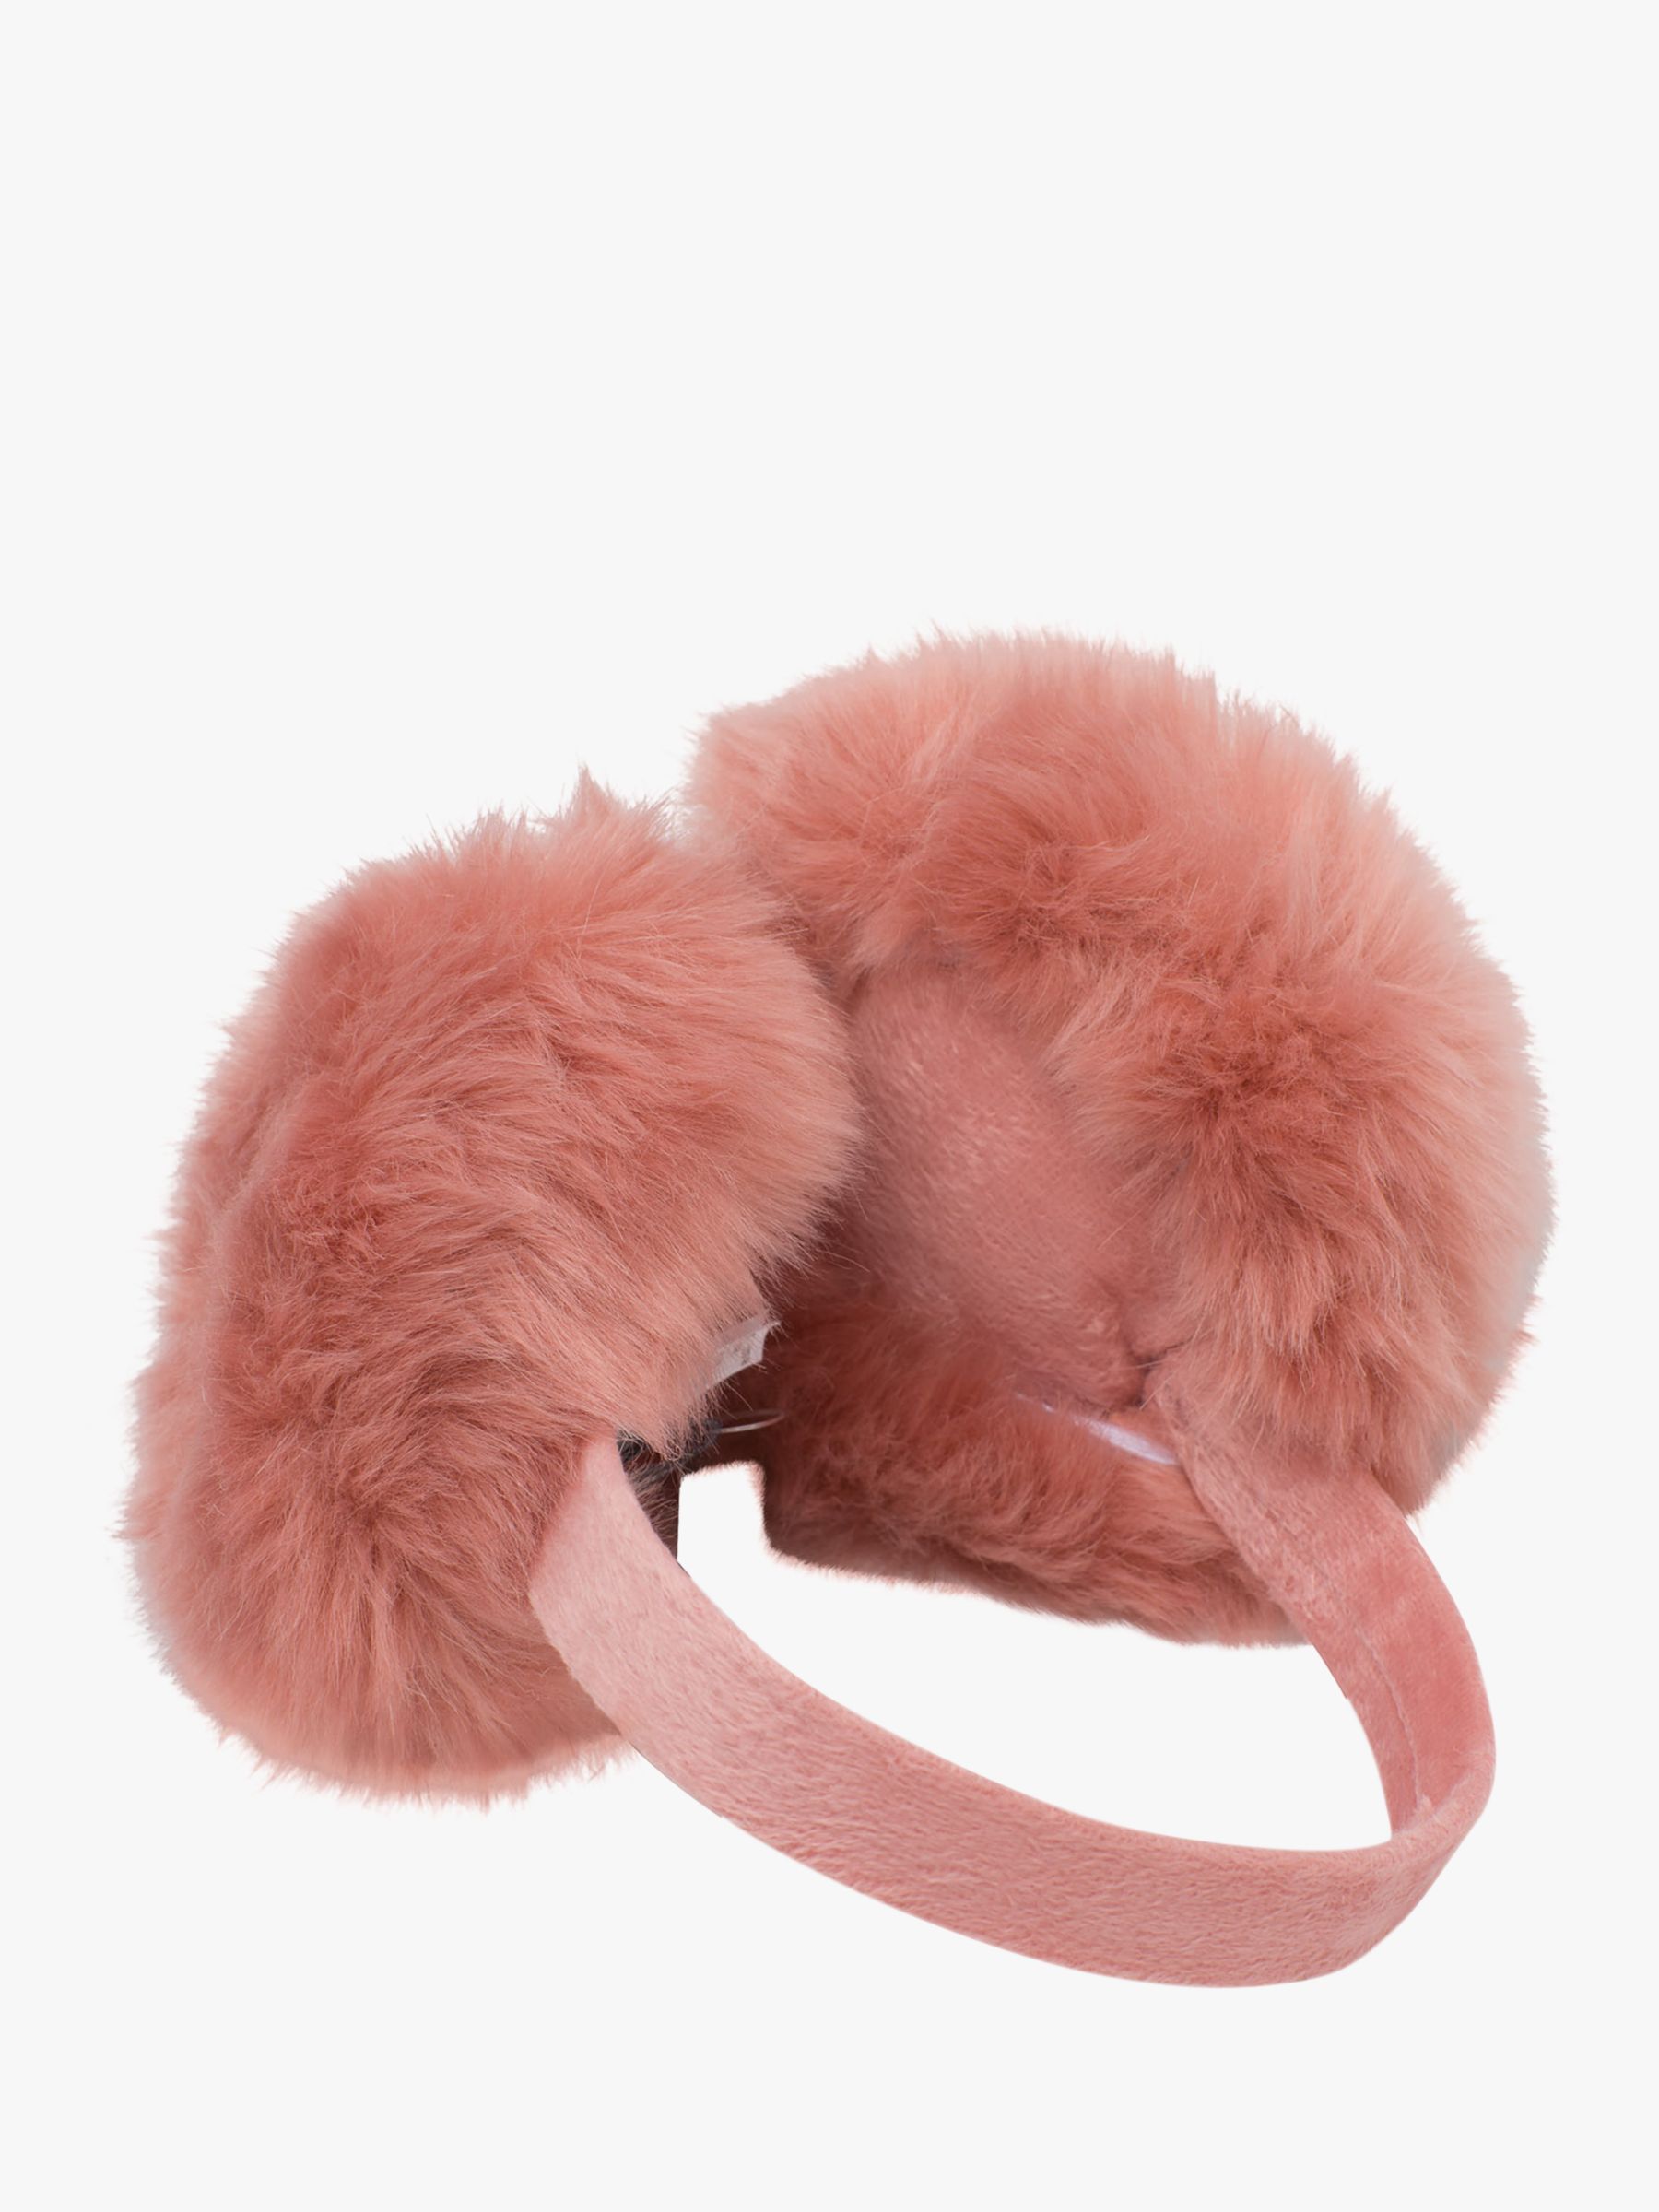 French Connection Faux Fur Ear Muffs, Dusty Pink at John Lewis & Partners